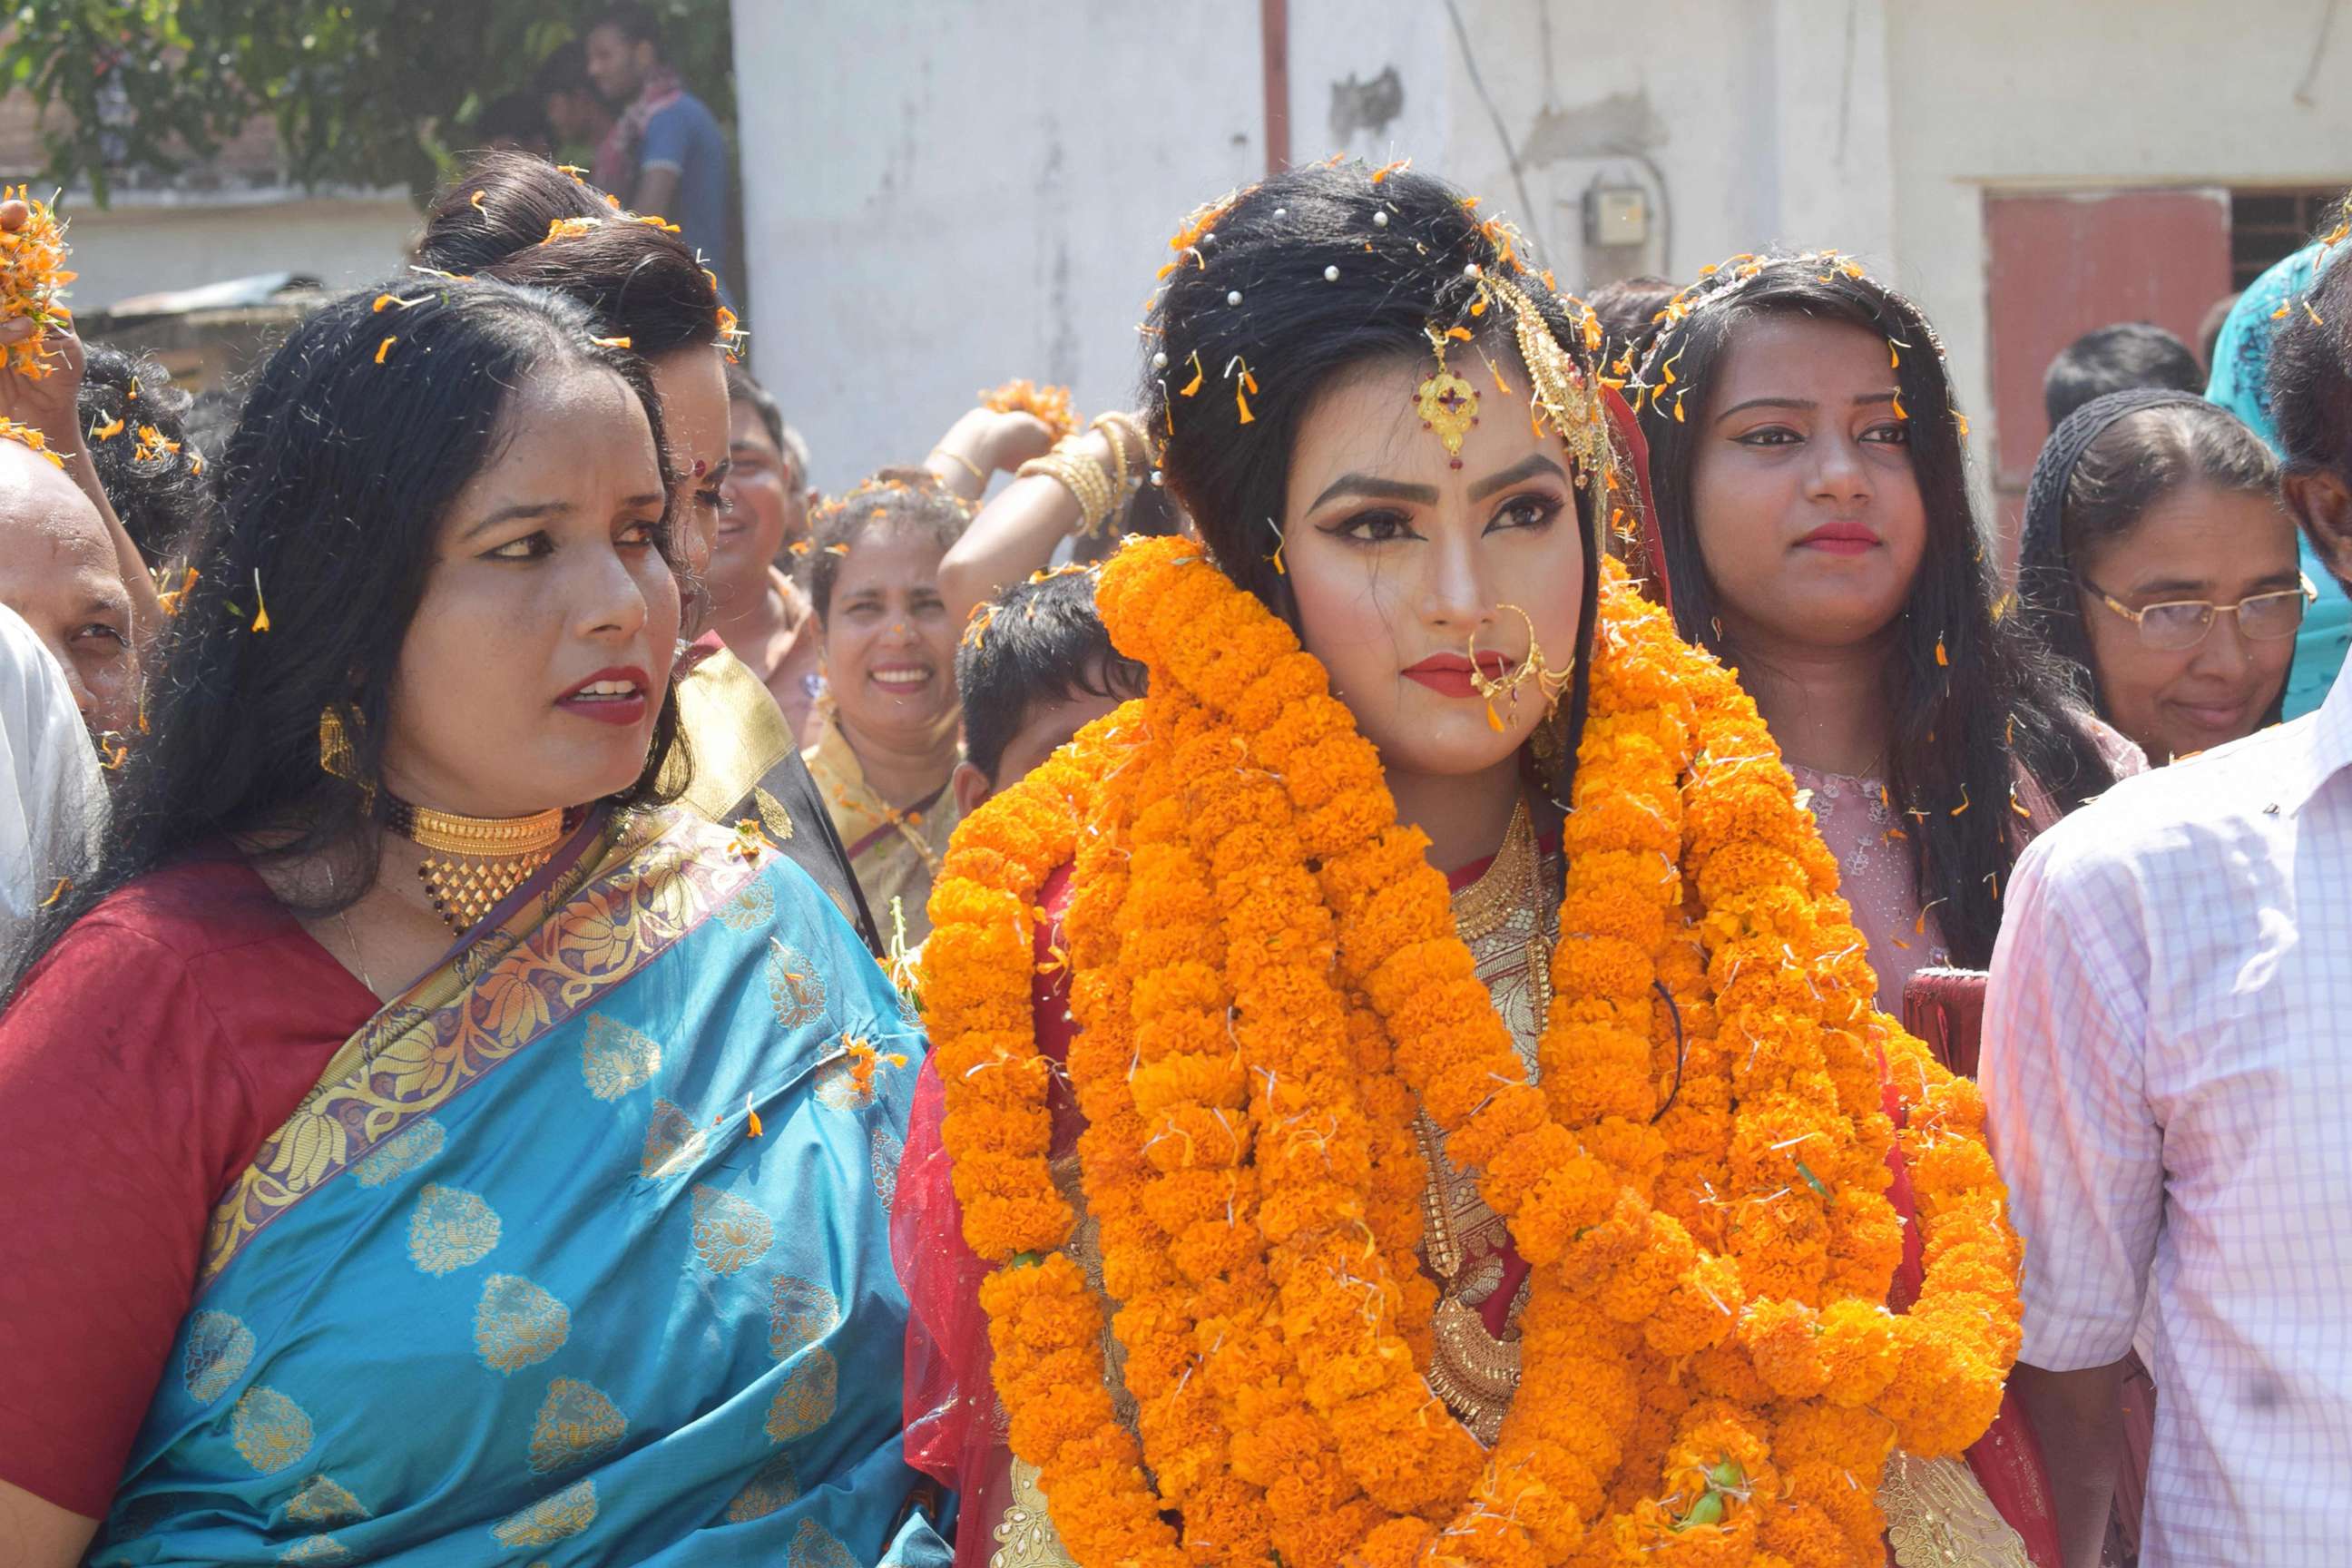 PHOTO:Relatives of groom Tariqul Islam welcome bride Khadiza Akter Khushi with a floral wreath as she arrives to groom's house during their wedding in Meherpur, Sept. 21, 2019.